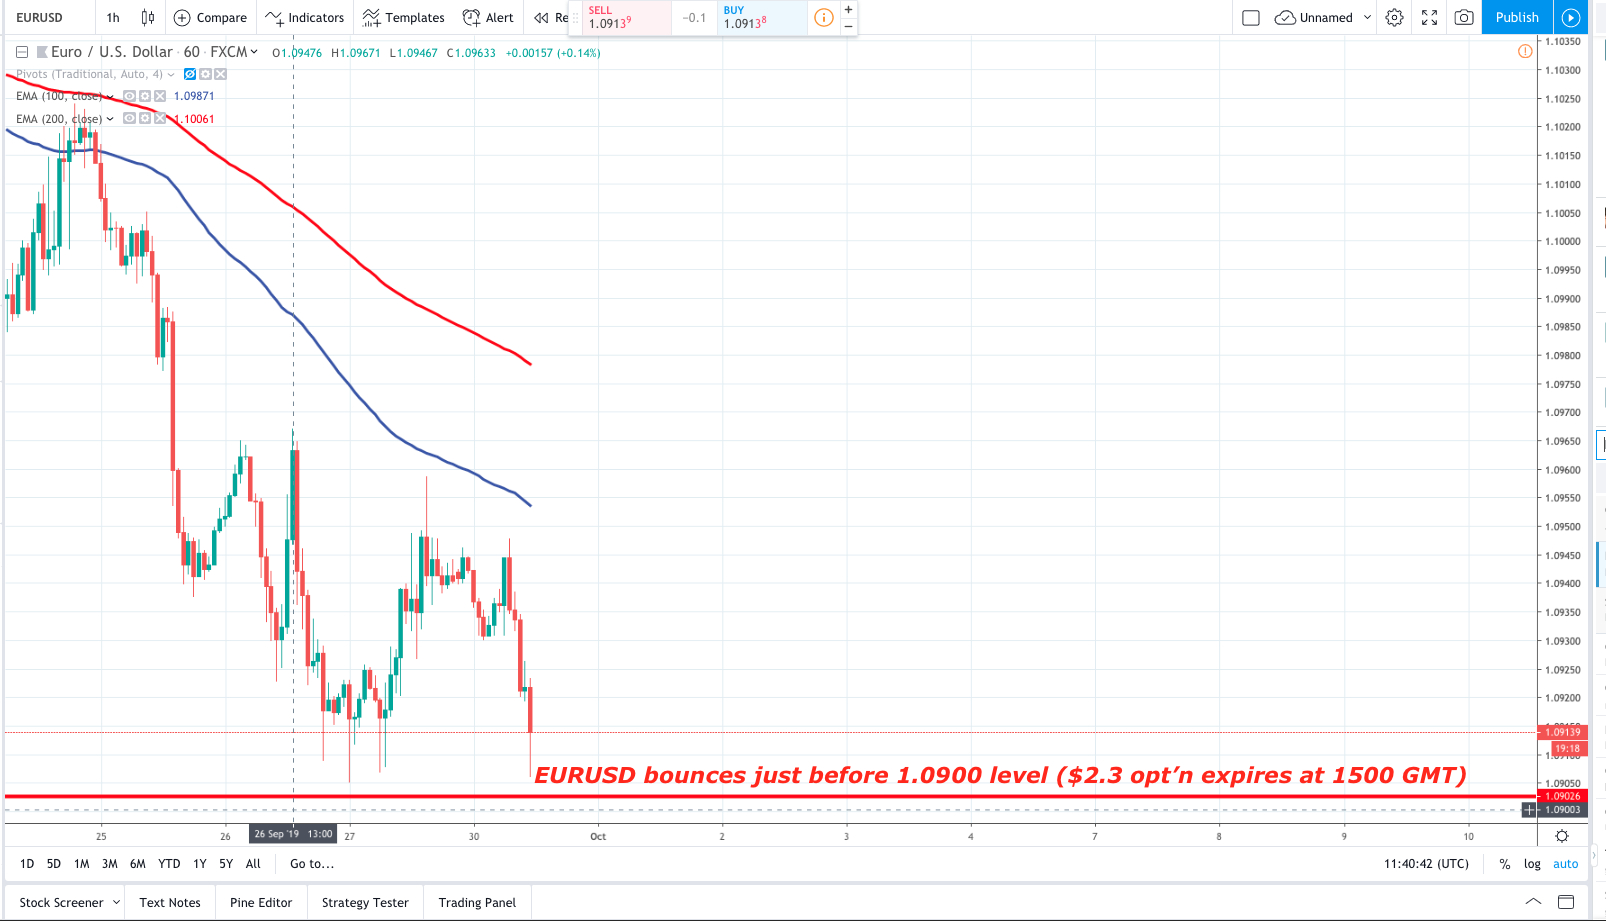 Forexlive European Fx News 30 Sep  Nzd Falls On 11 Year Low with Forexlive Economic Calendar